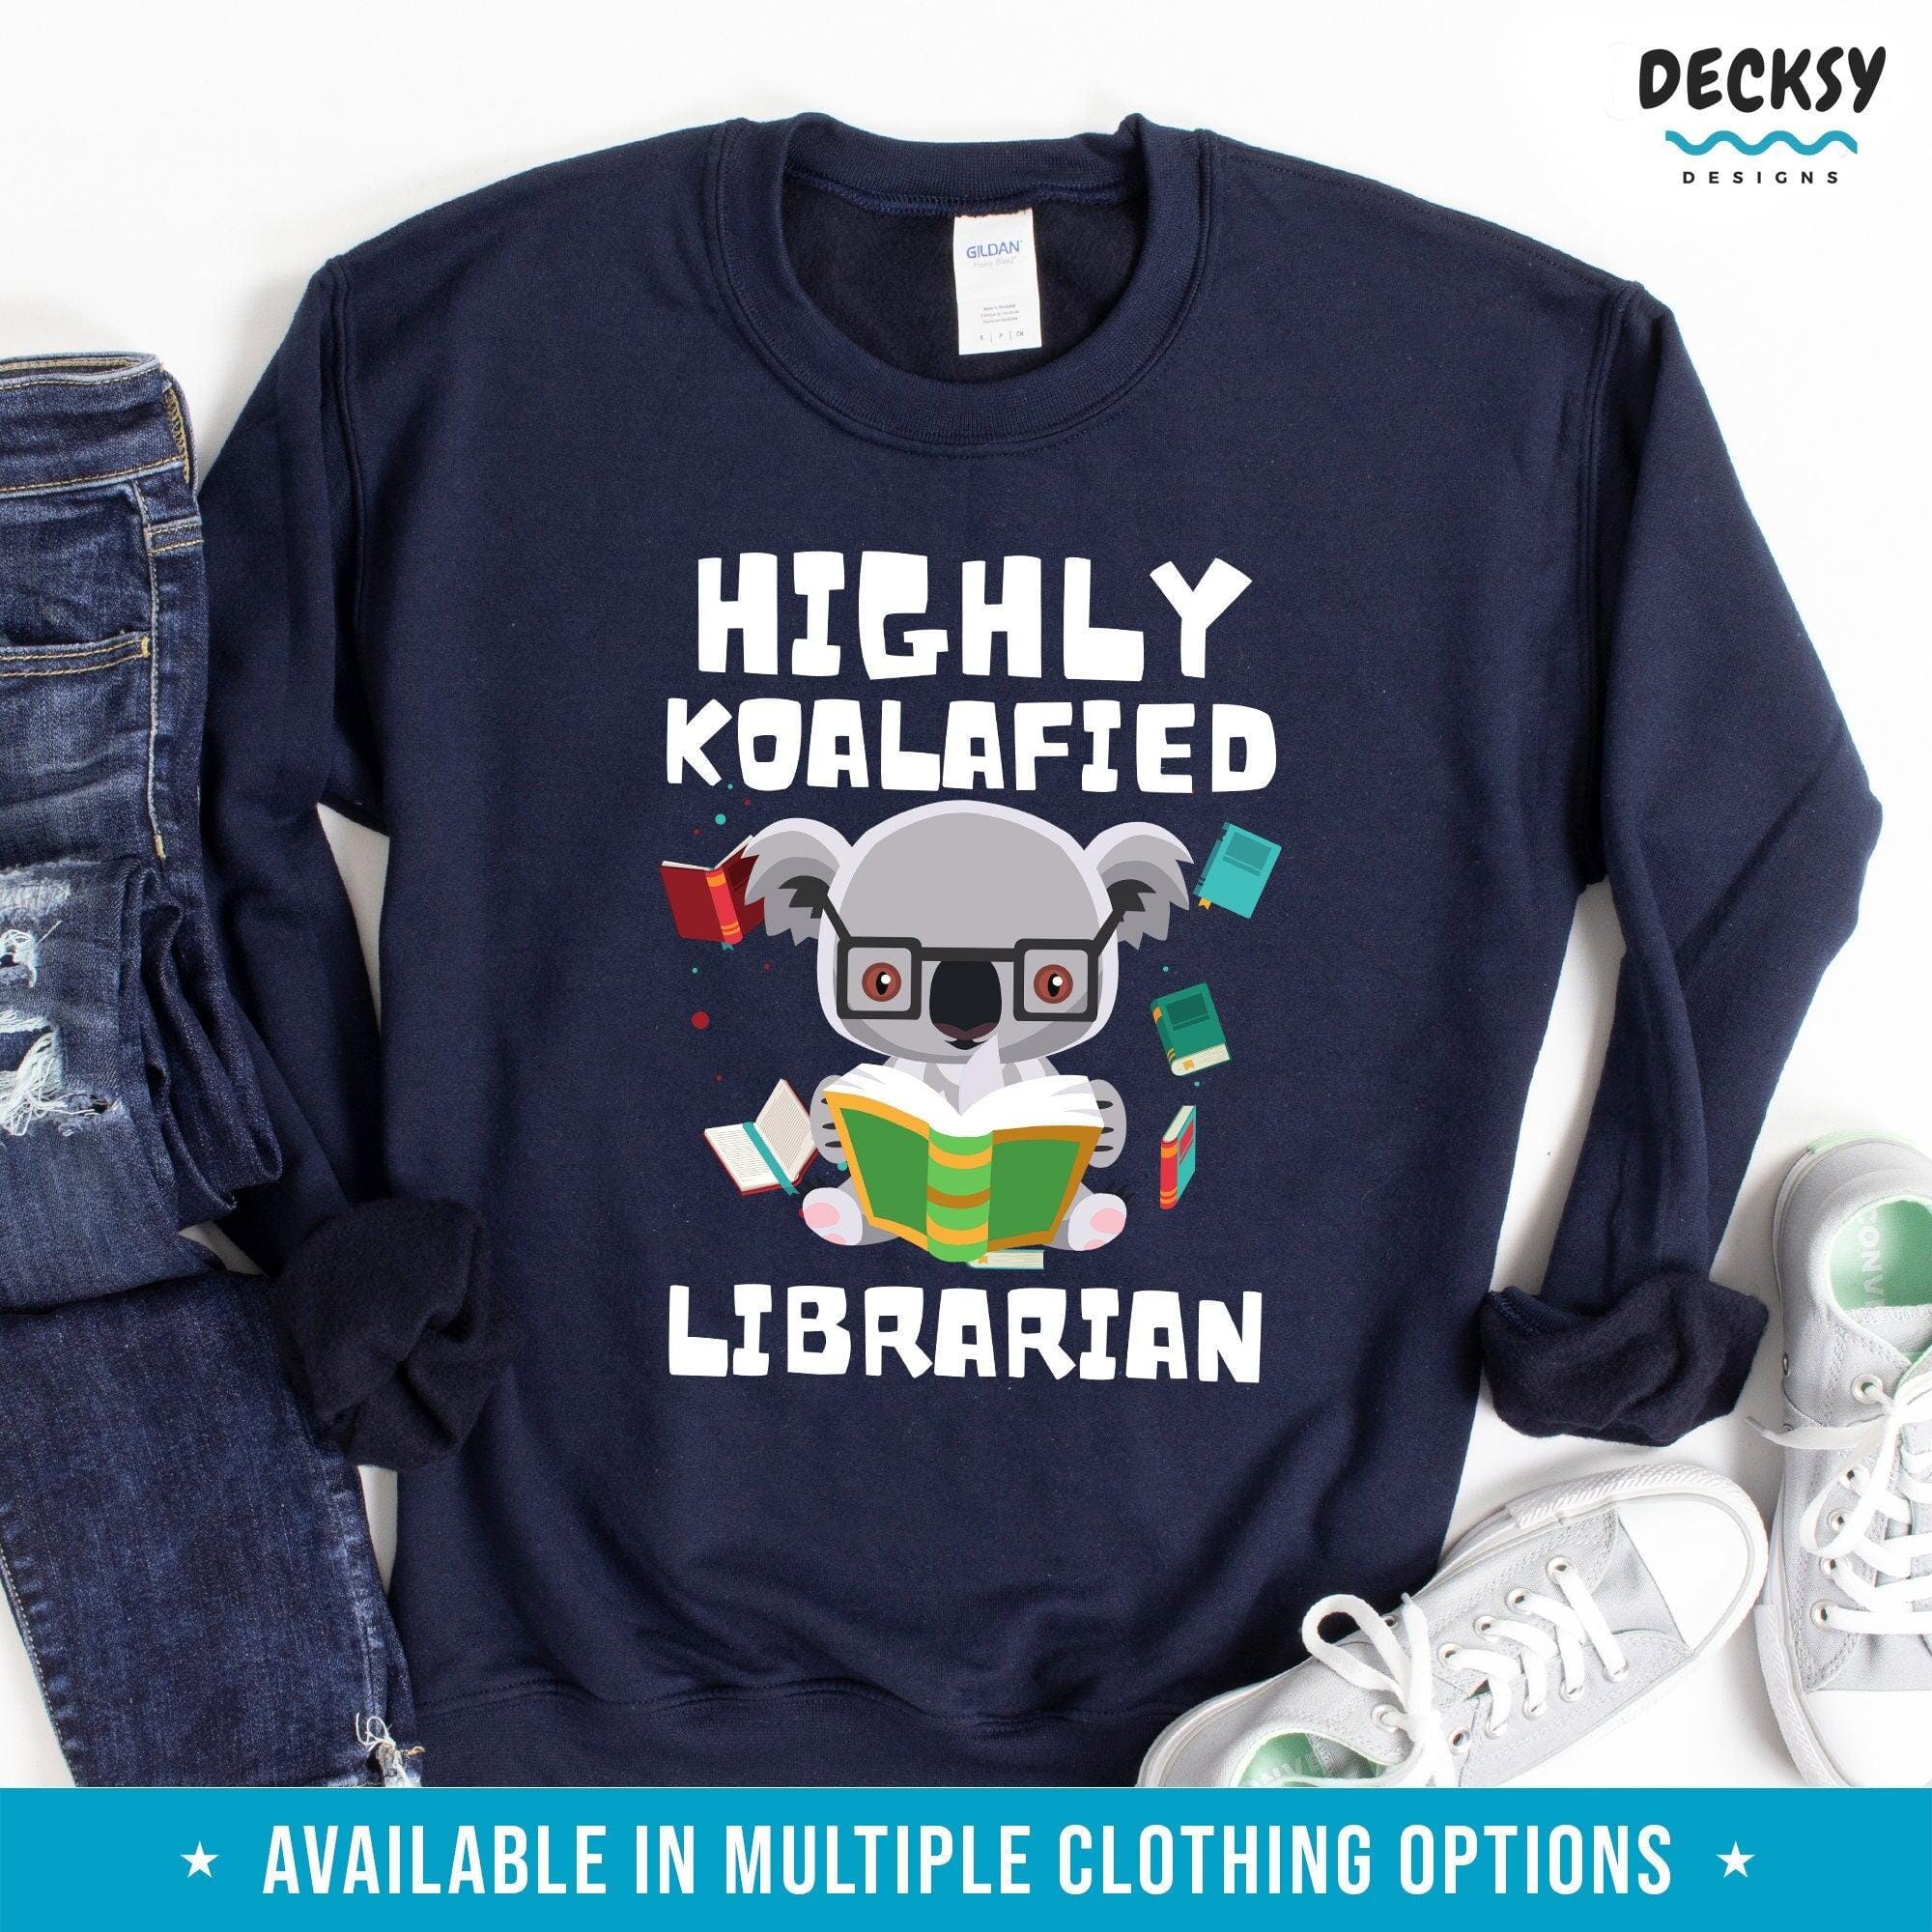 Librarian Tshirt, Gift for Librarian-Clothing:Gender-Neutral Adult Clothing:Tops & Tees:T-shirts:Graphic Tees-DecksyDesigns